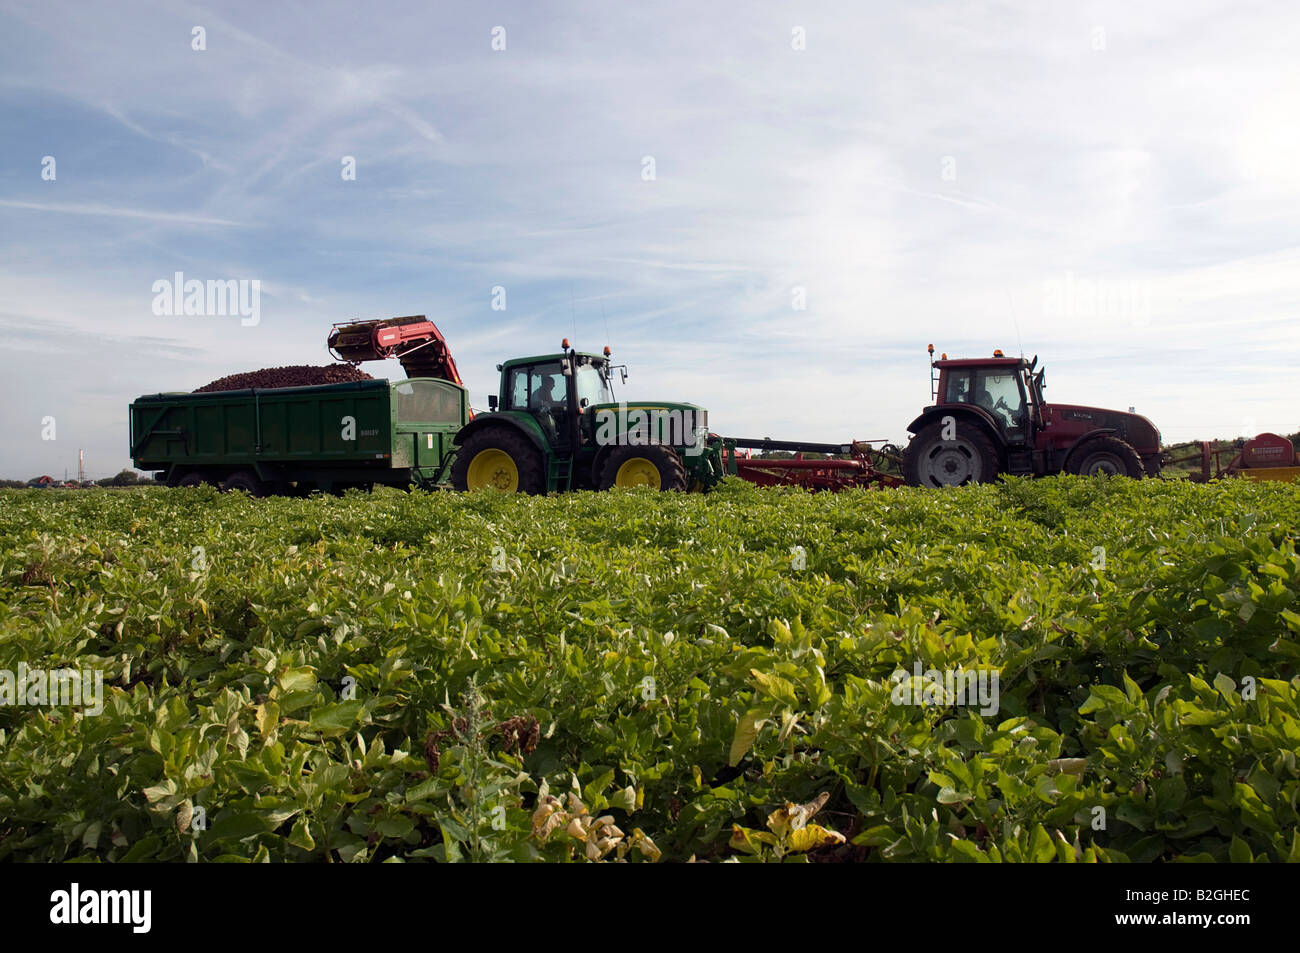 Harvesting a crop of potatoes Stock Photo